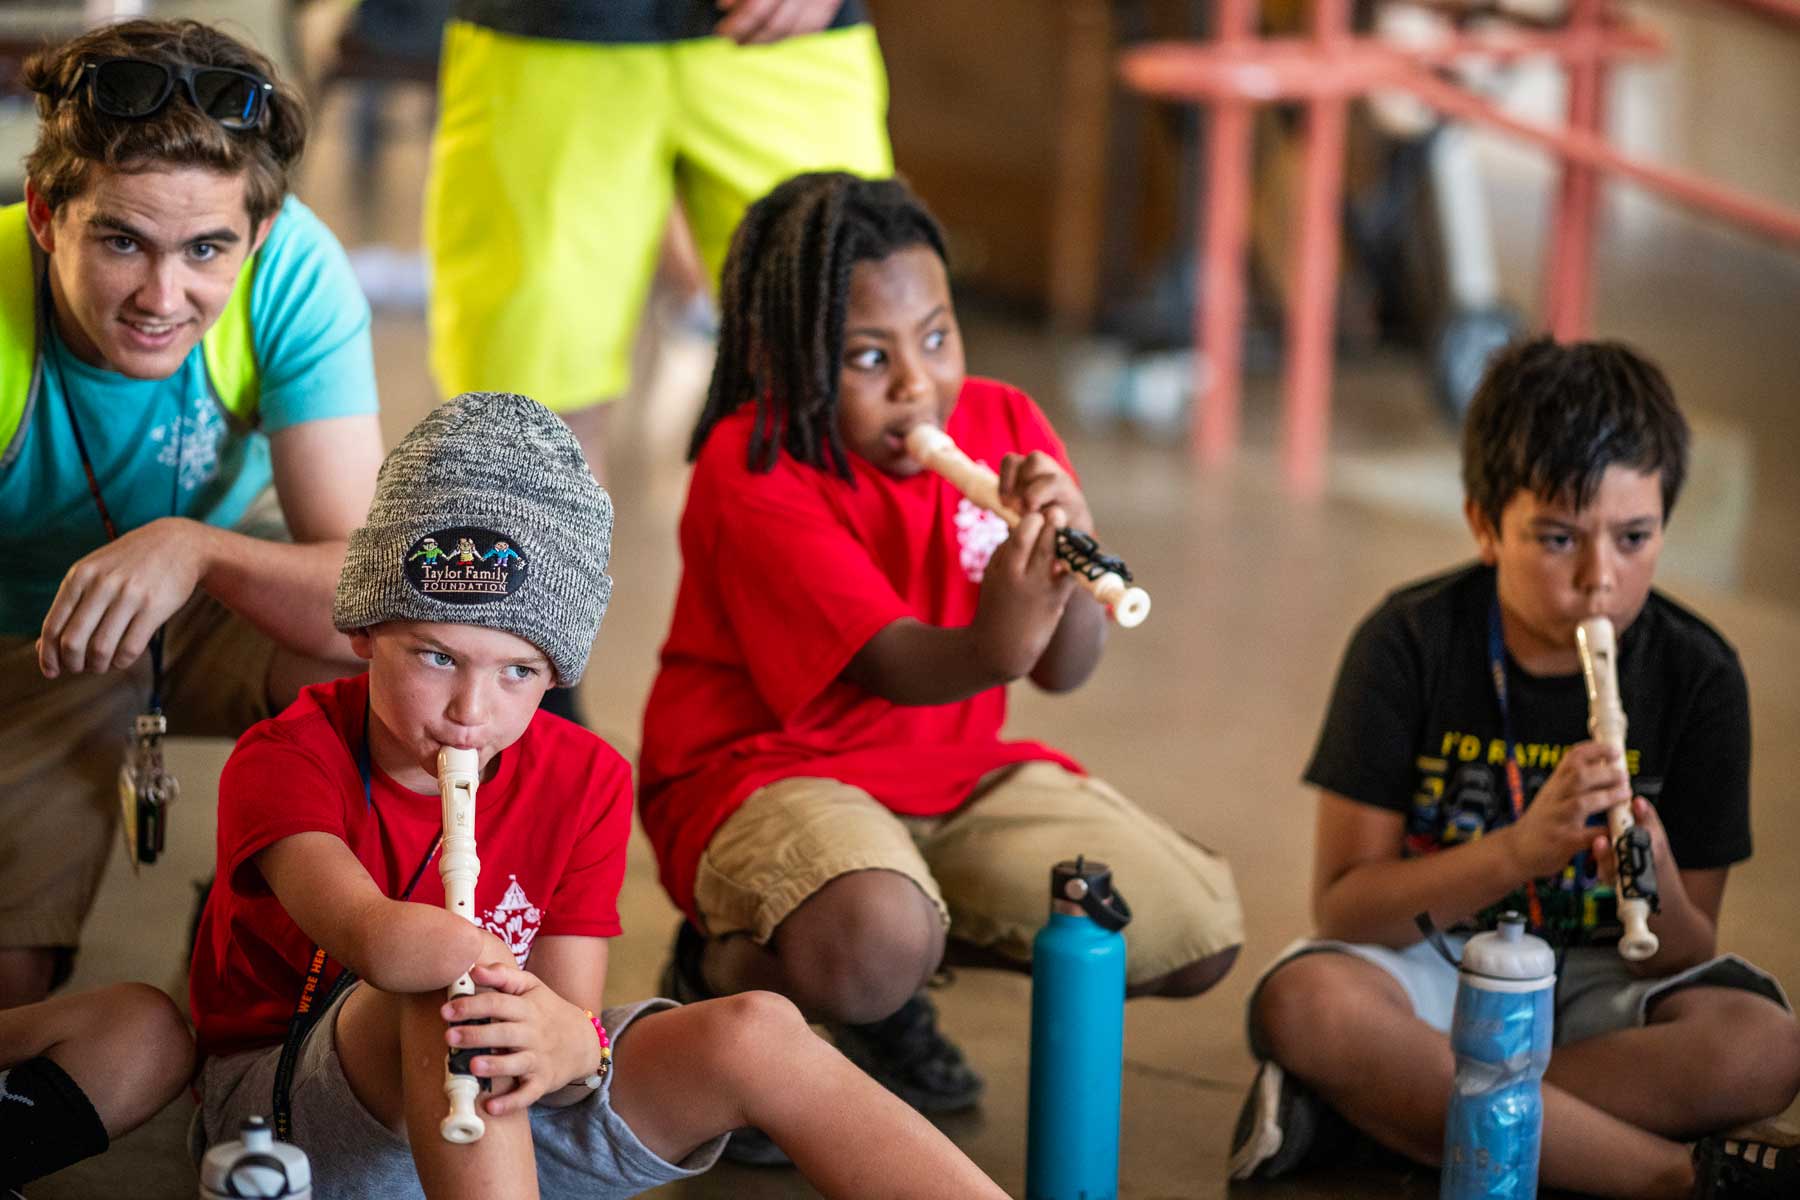 A diverse group of children with limb differences play music on adaptive recorders.